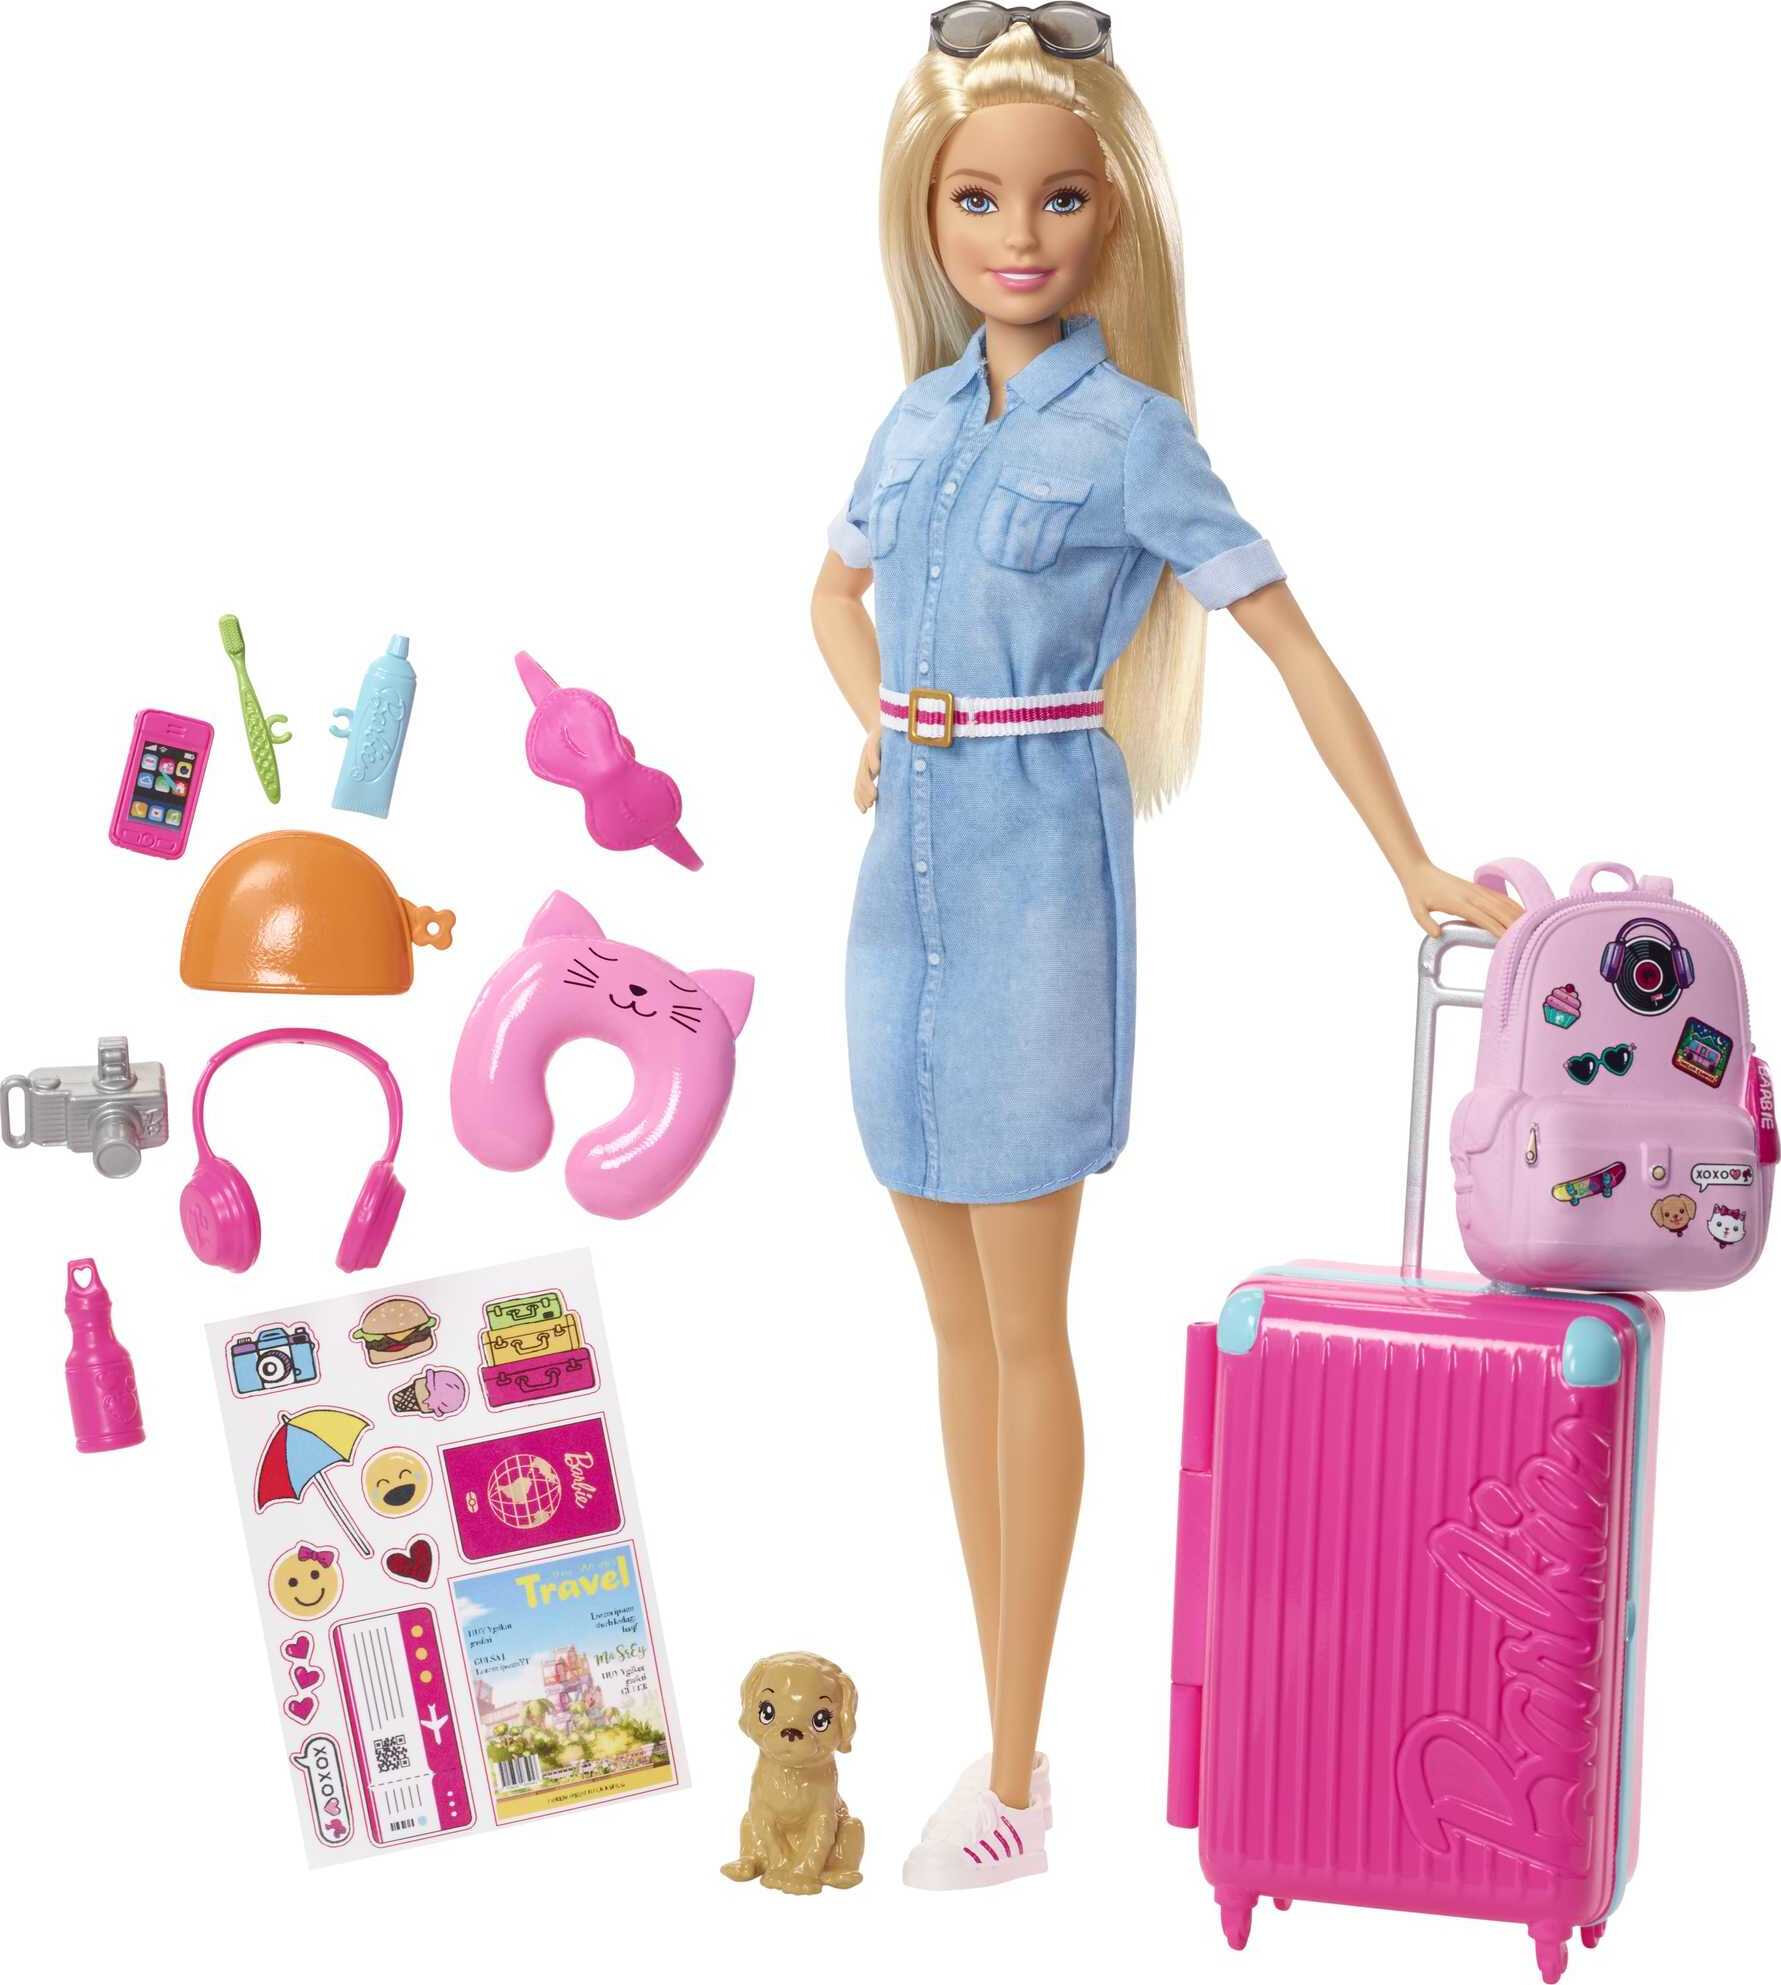 Barbie Dreamhouse Adventures Travel Doll & 10+ Accessories, Working Suitcase, Blonde Fashion Doll - image 1 of 7